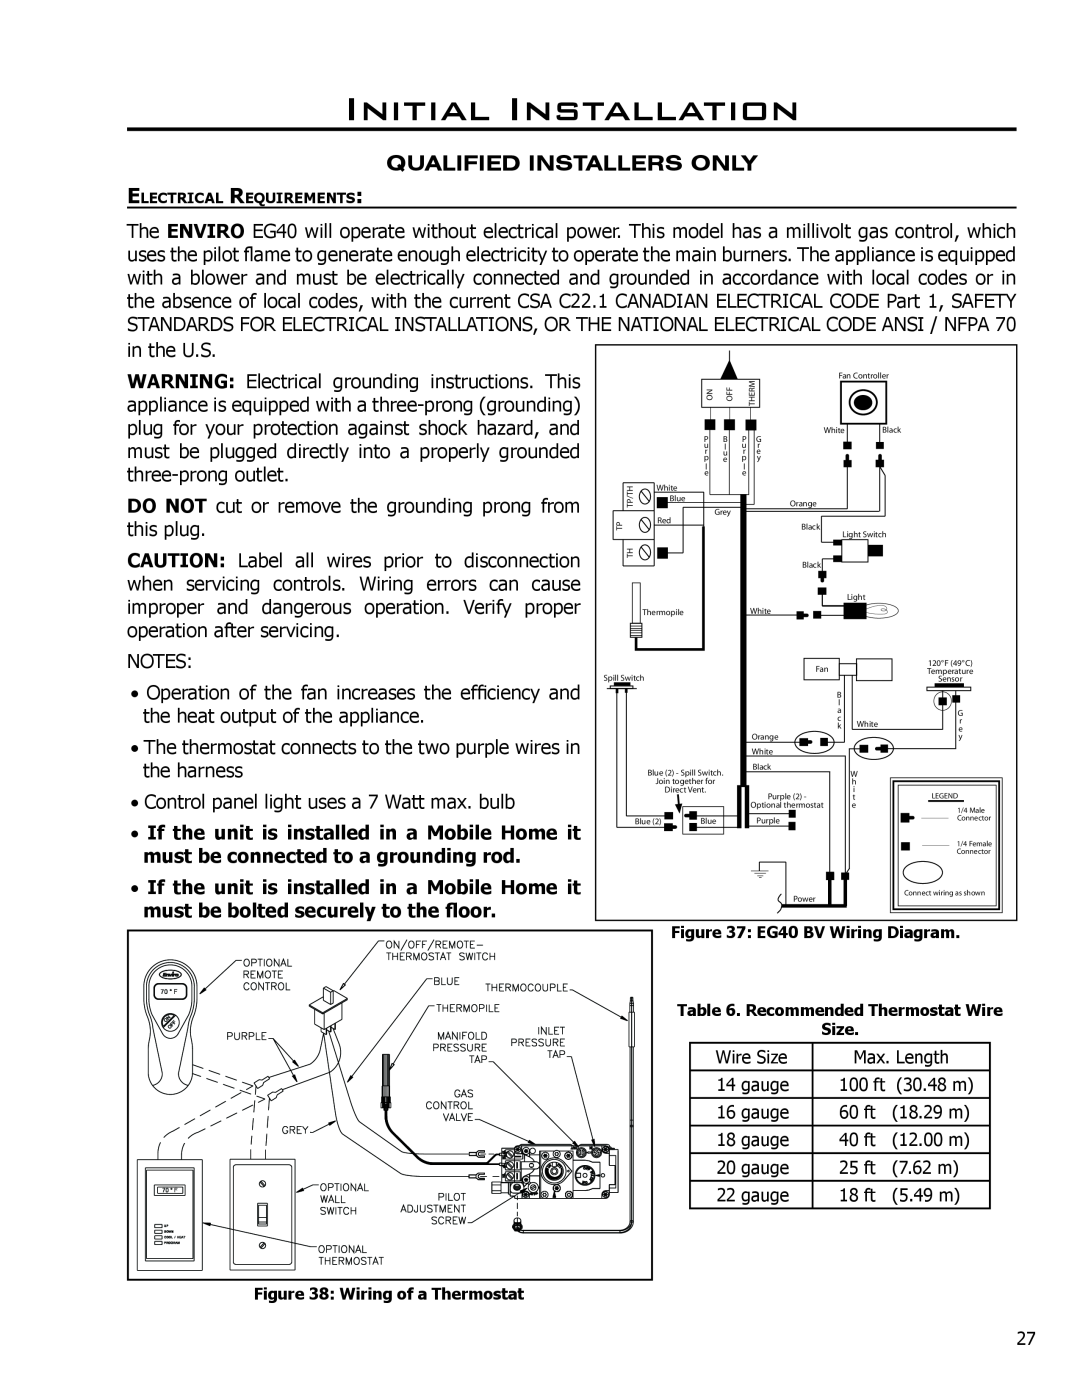 Sherwood EG40 DV owner manual Initial Installation, Qualified Installers Only, must be connected to a grounding rod 